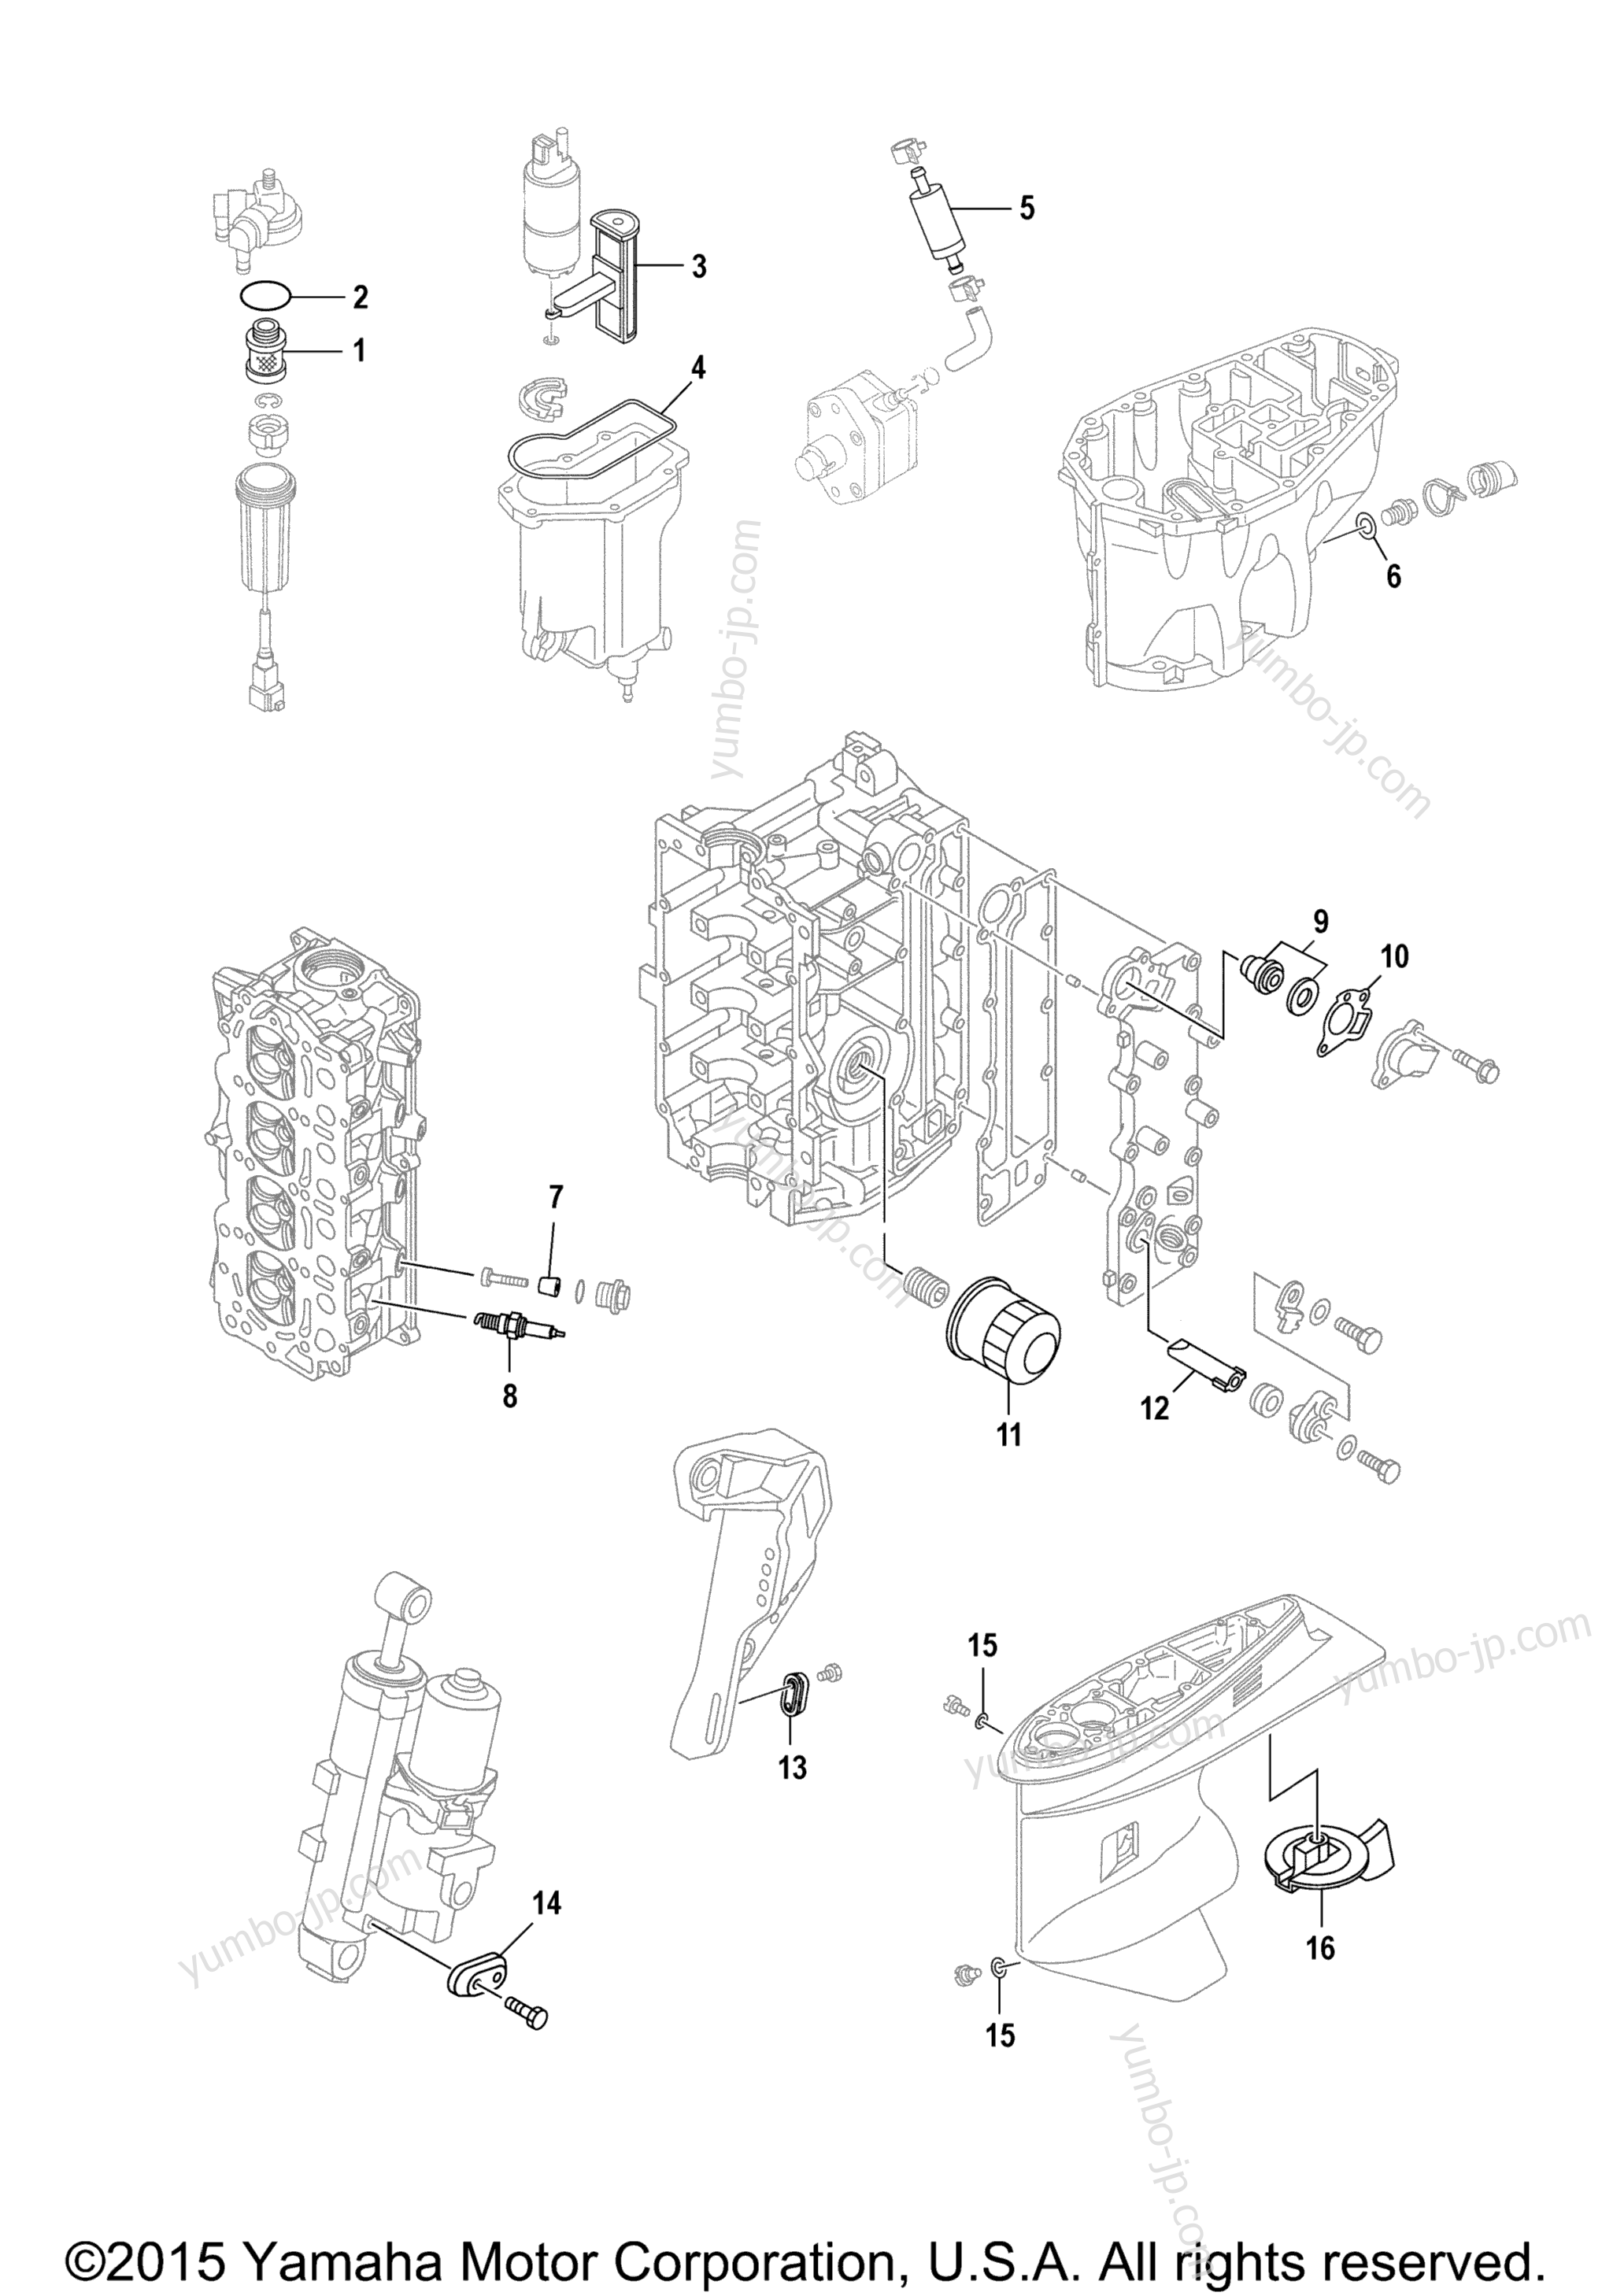 Scheduled Service Parts for outboards YAMAHA F70LA_0112 (0112) 2006 year